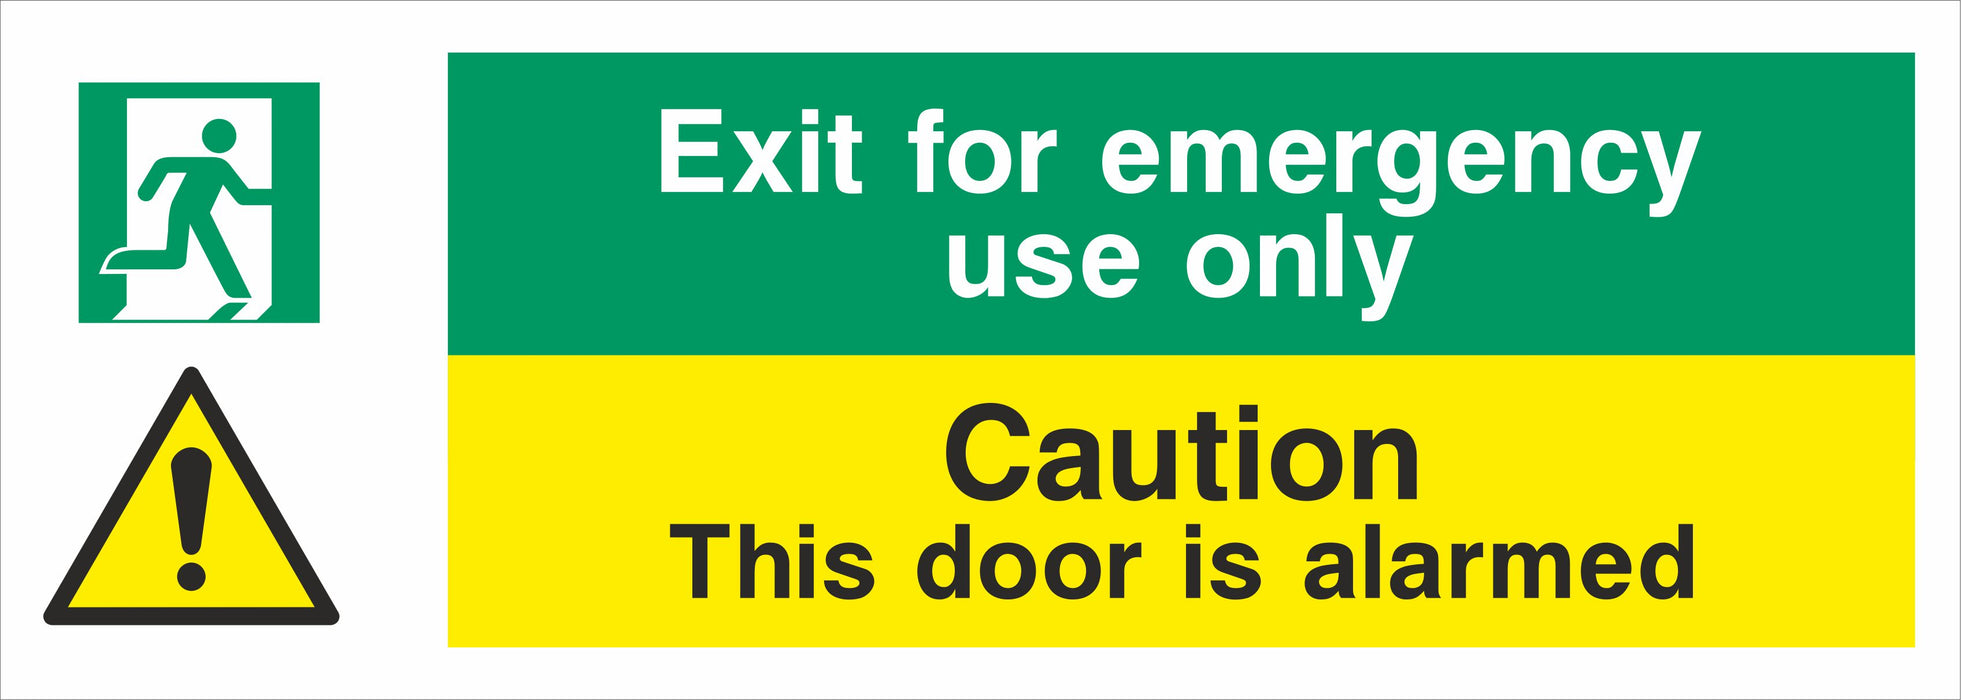 Exit for emergency use only Caution this door is alarmed